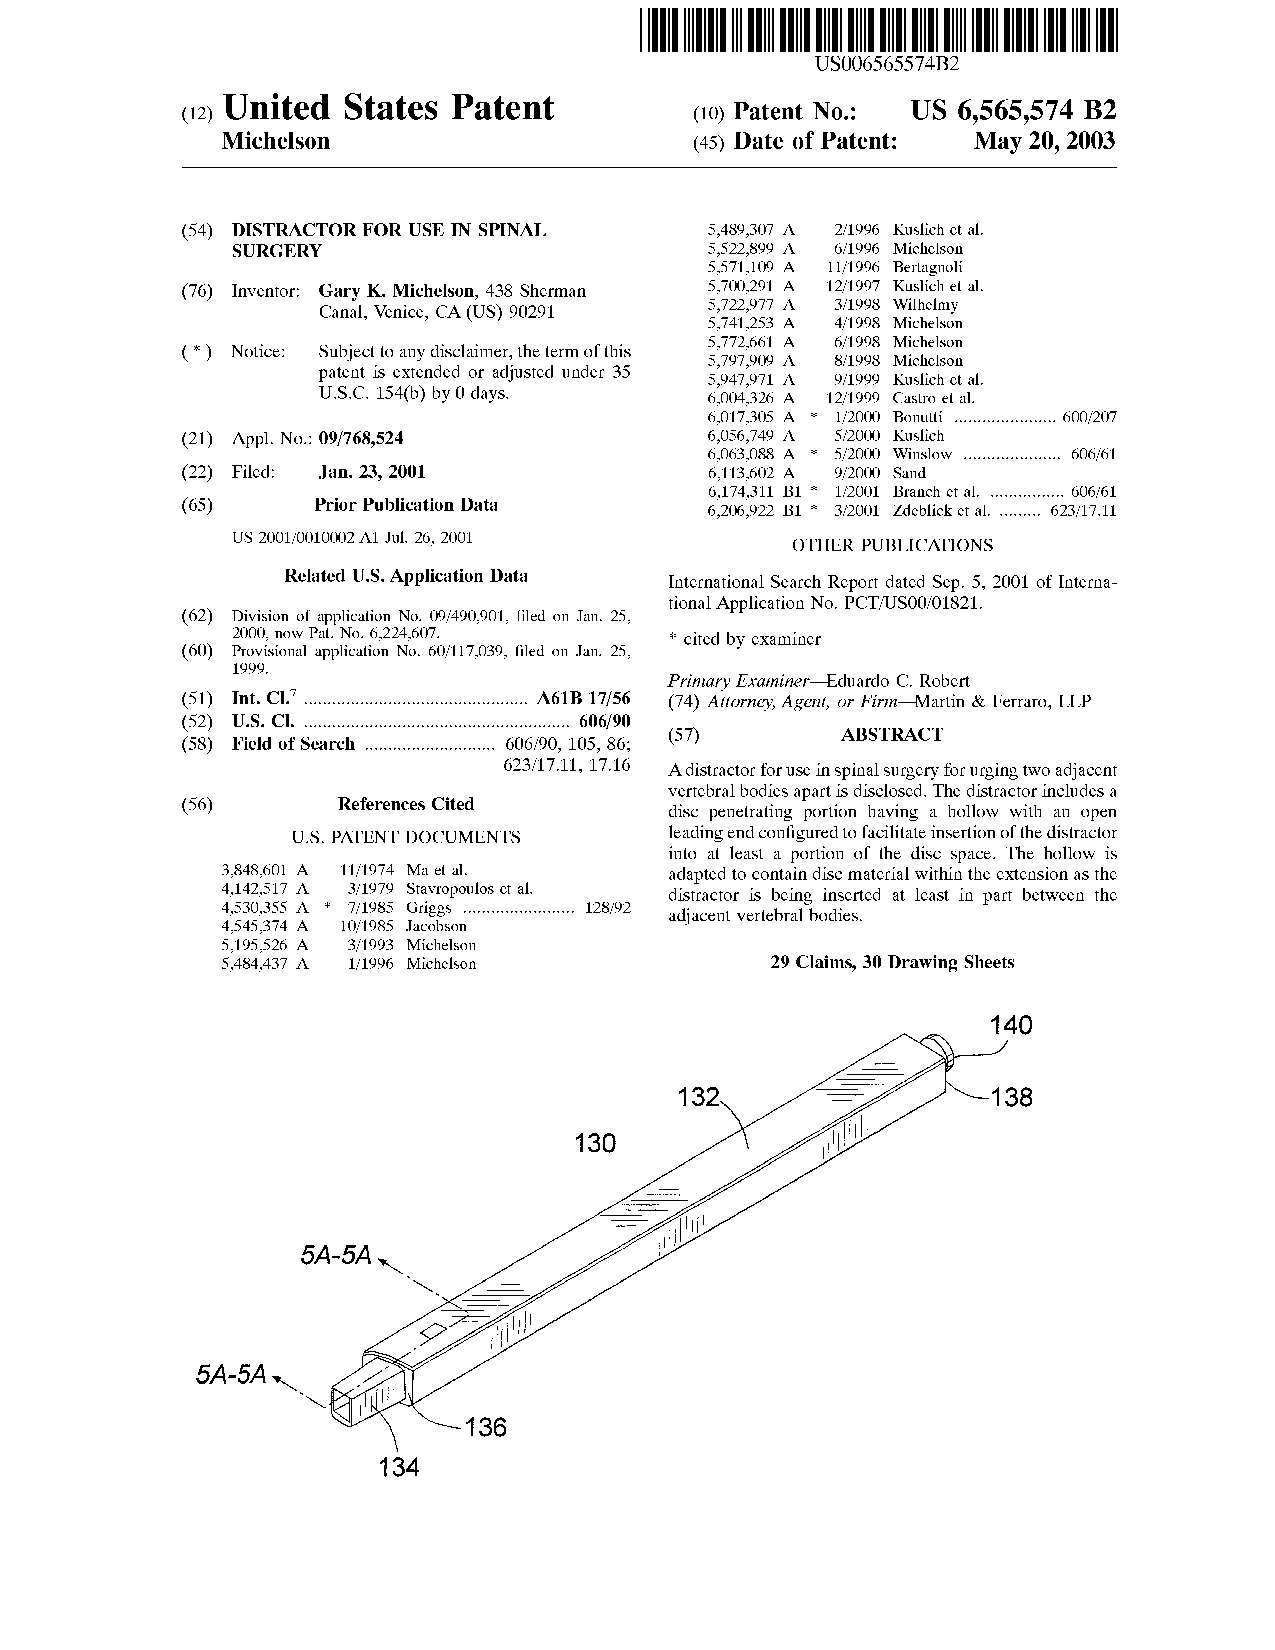 Distractor for use in spinal surgery - Patent 6,565,574